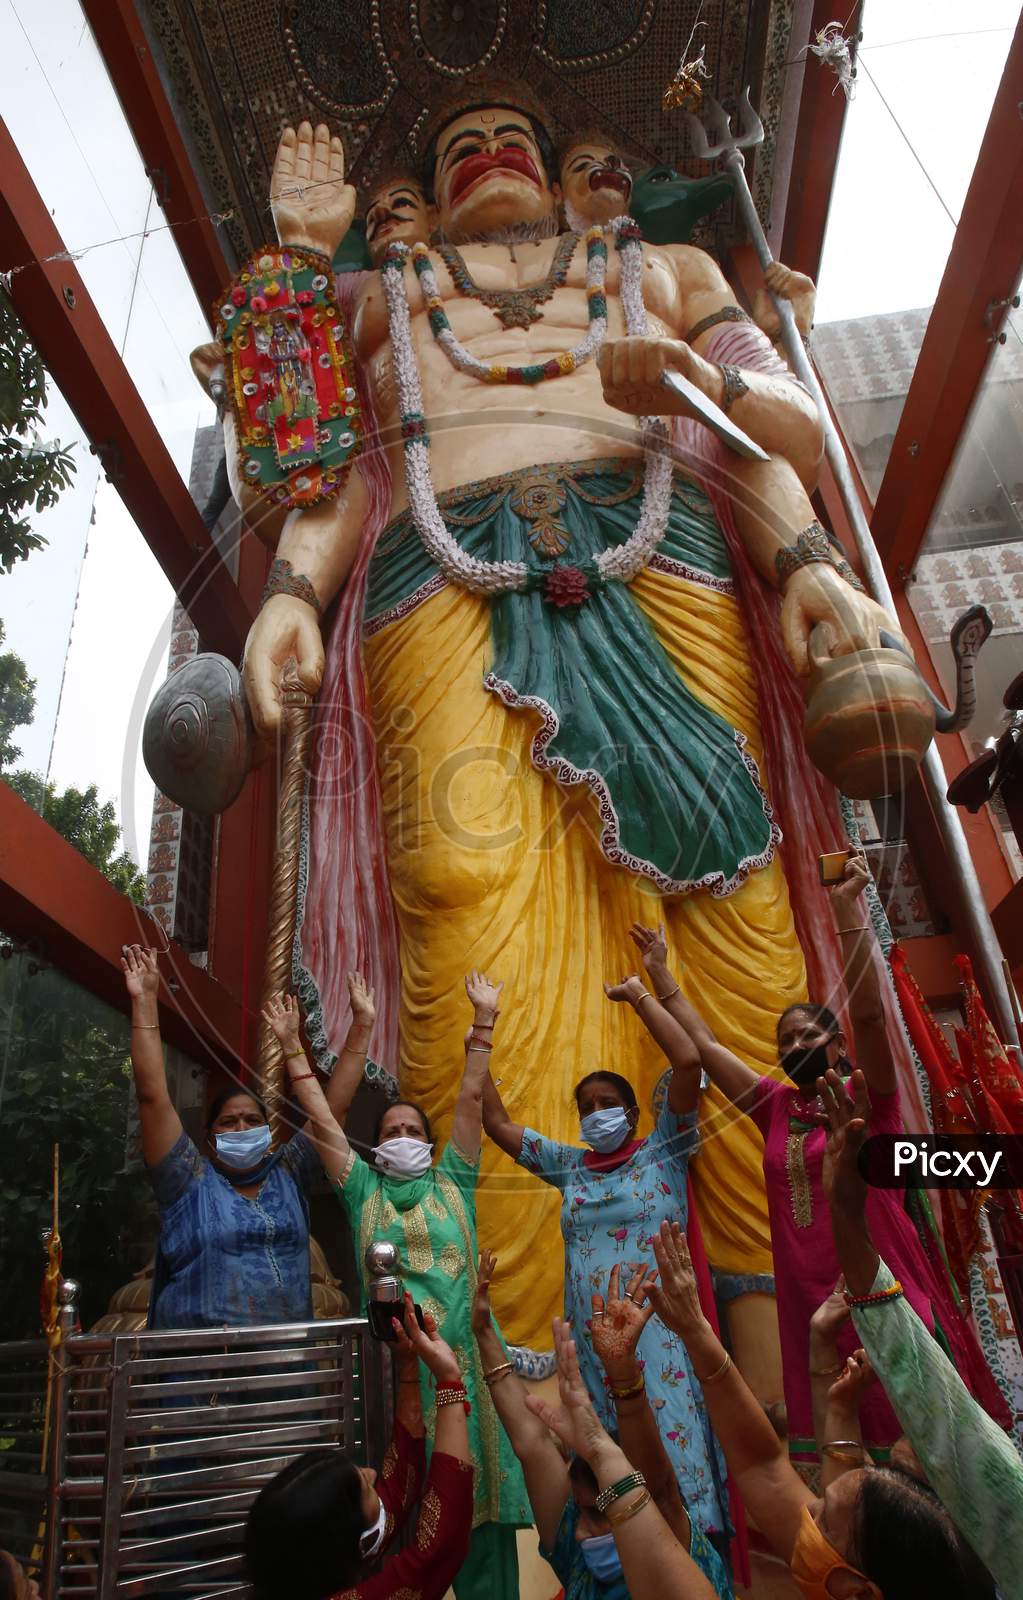 Devotees react after tying a 32-feet long Rakhi to an idol of Hindu lord Hanuman at the temple premises in Chandigarh, on August 3, 2020.